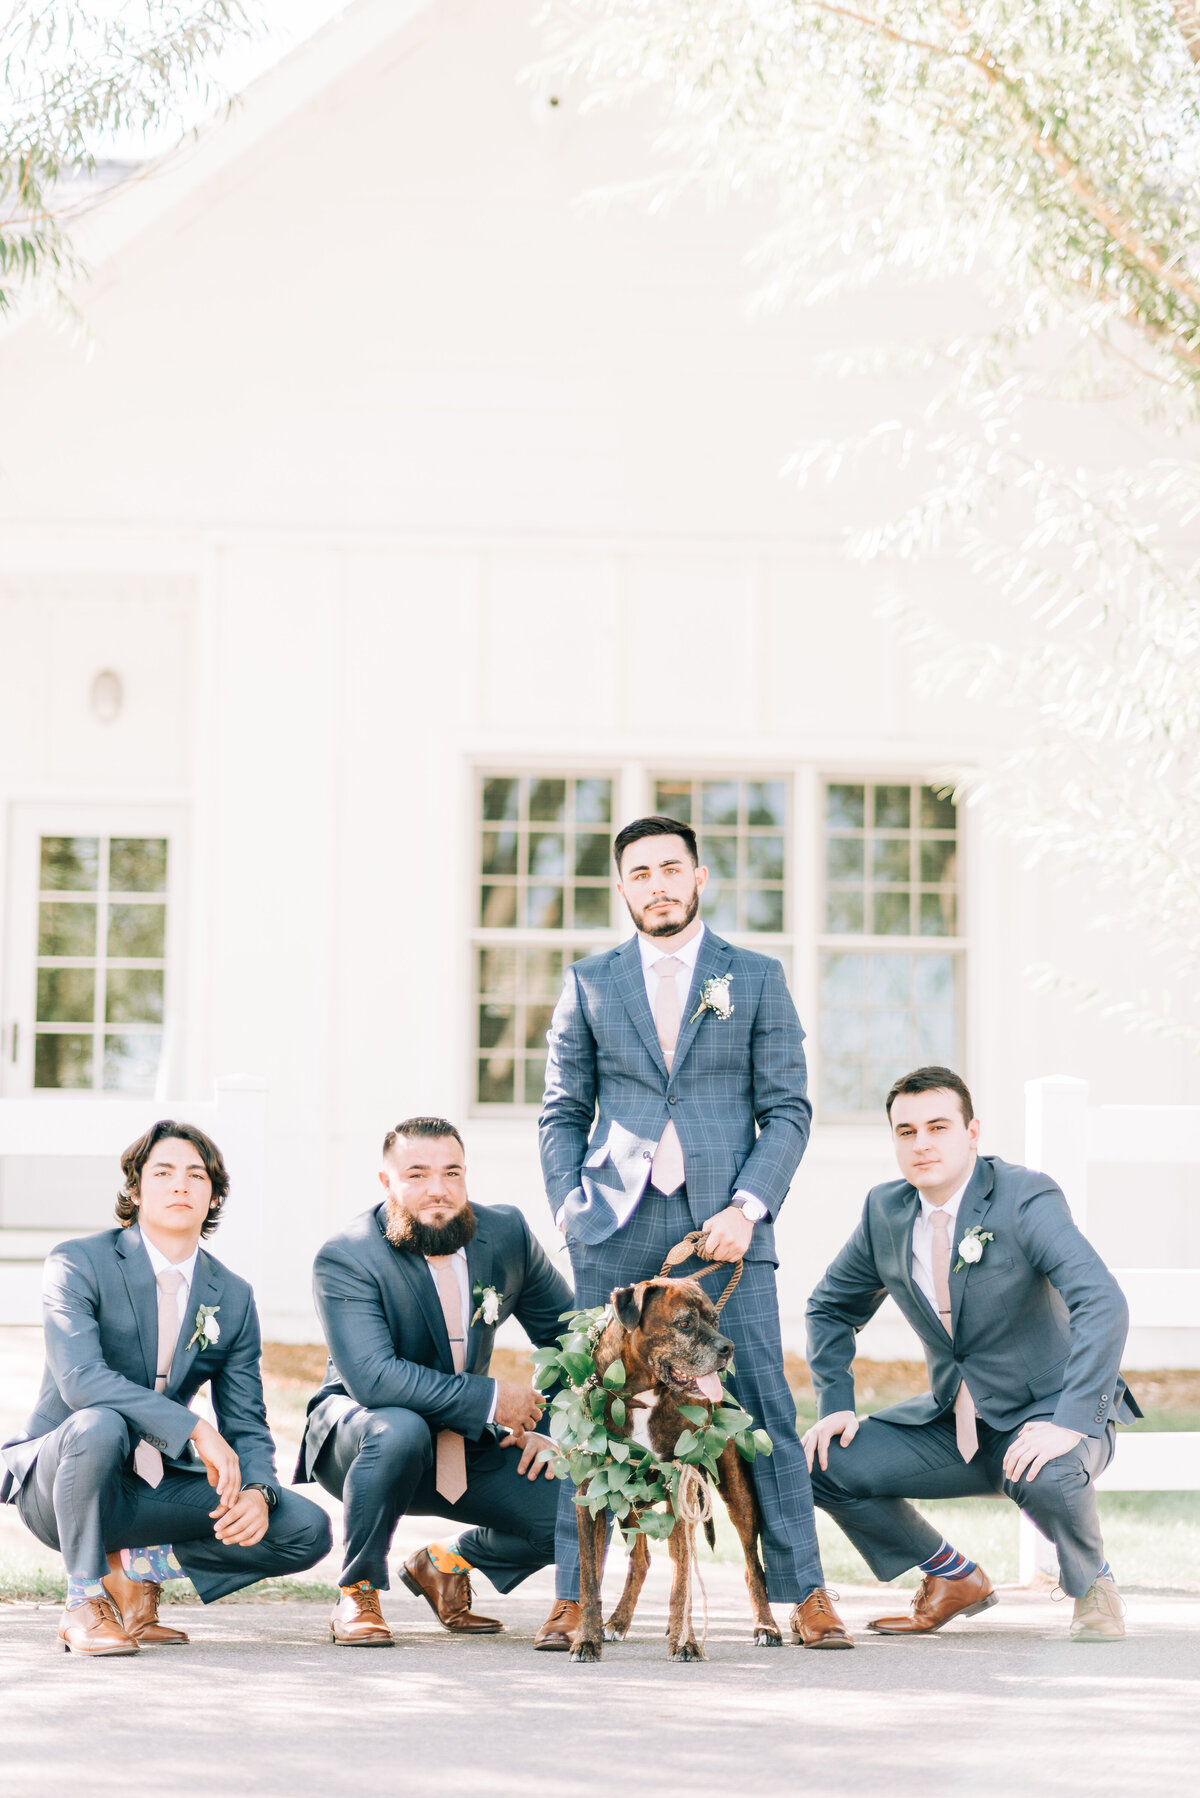 groom and his groomsmen pose for a photo with the dog who is also the ring bearer